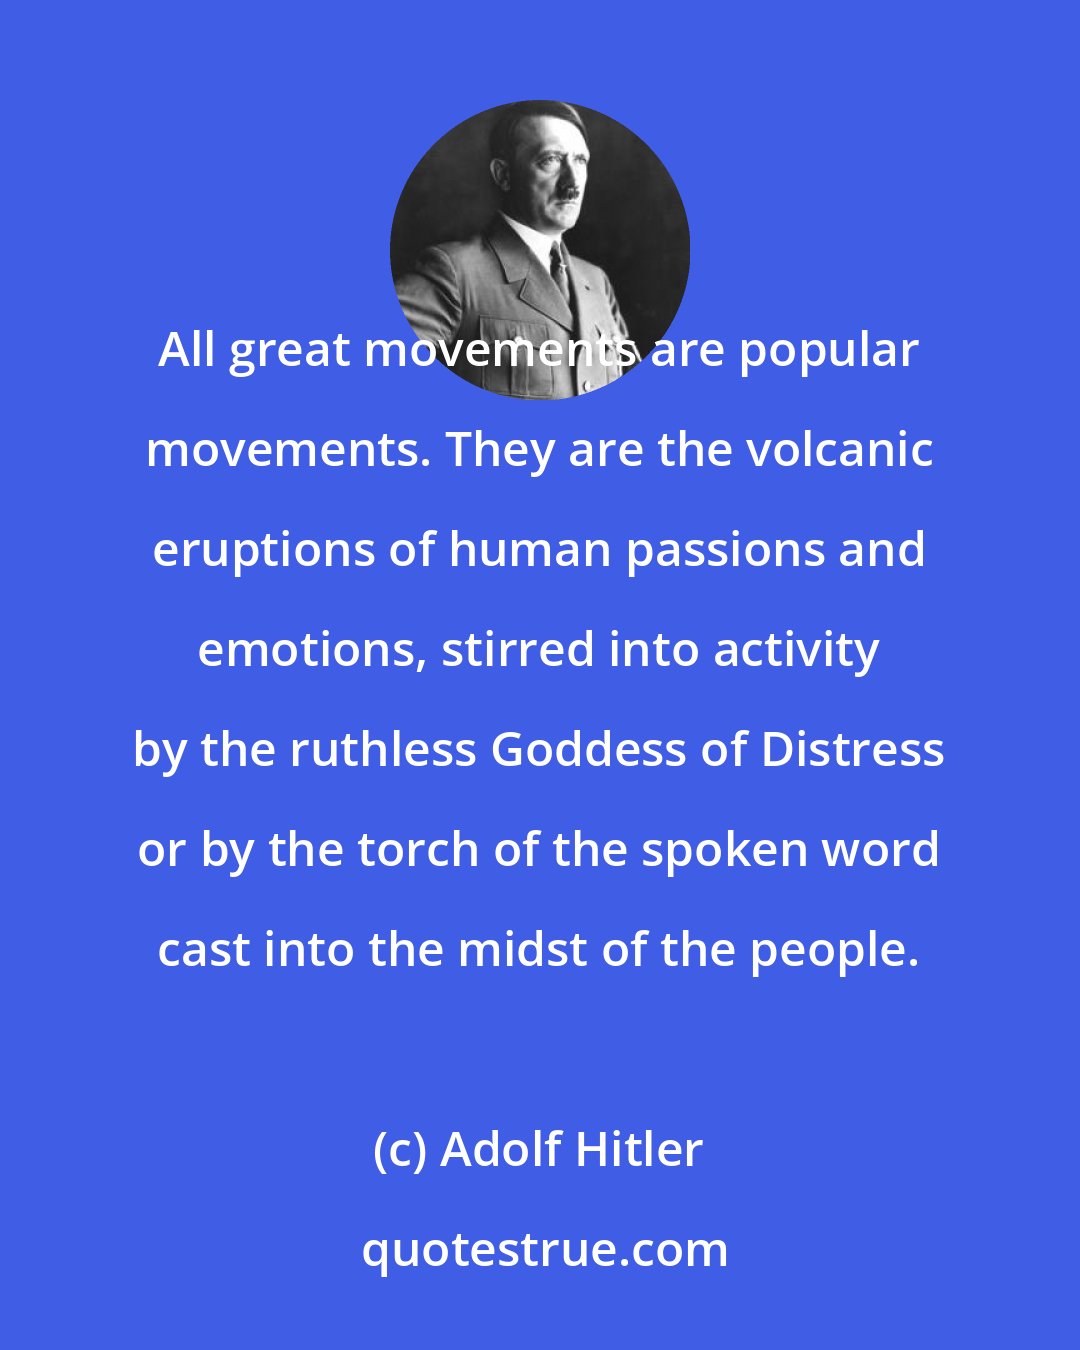 Adolf Hitler: All great movements are popular movements. They are the volcanic eruptions of human passions and emotions, stirred into activity by the ruthless Goddess of Distress or by the torch of the spoken word cast into the midst of the people.